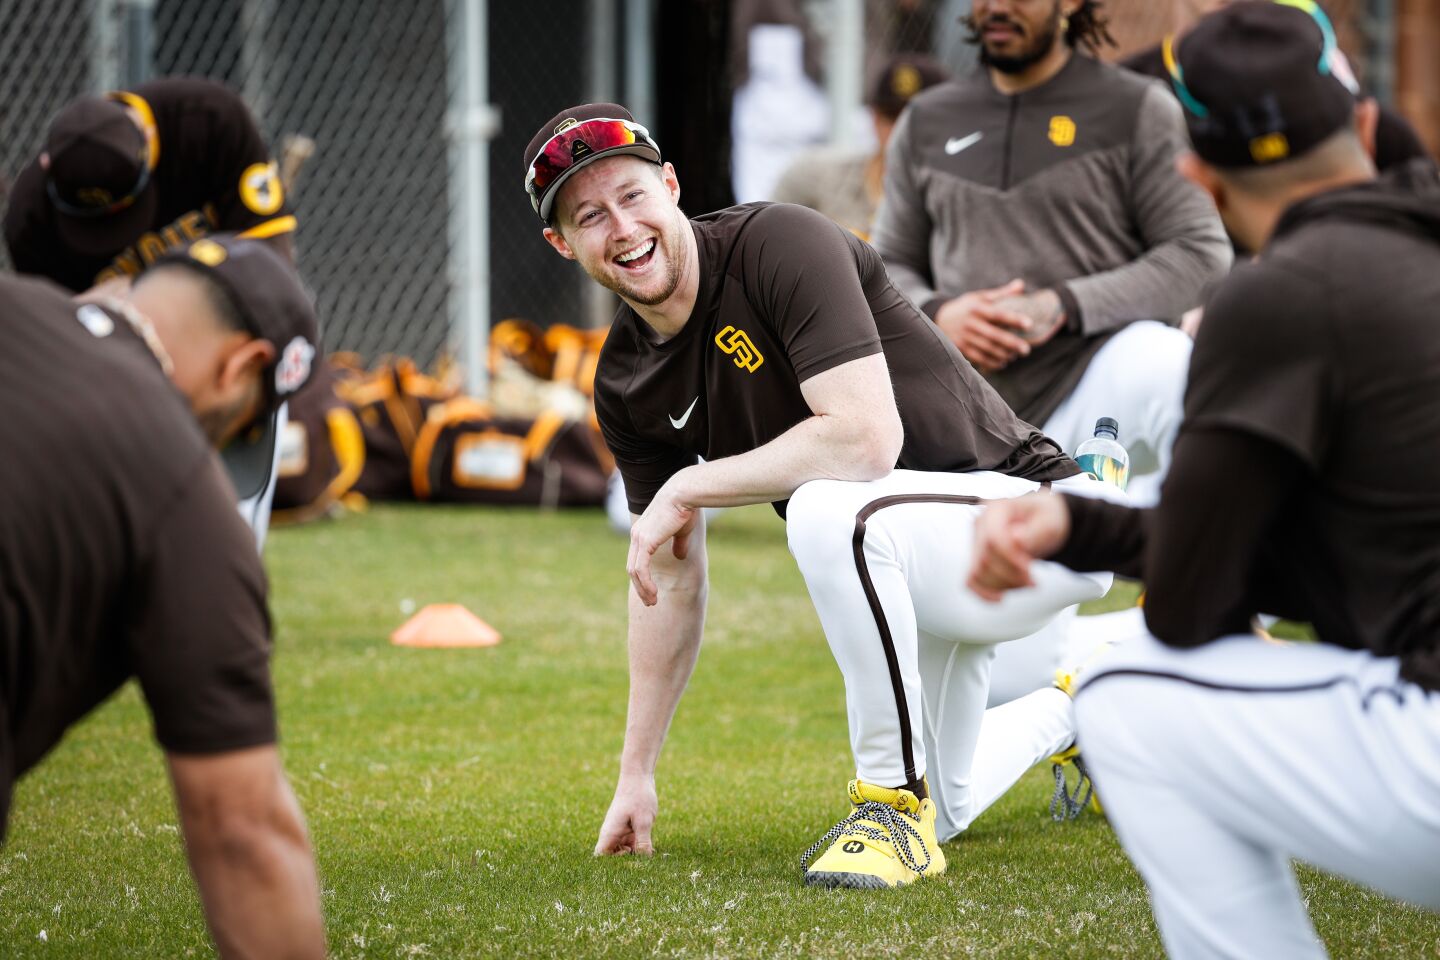 Padres second baseman Jake Cronenworth (9) laughs during a spring training practice at the Peoria Sports Complex on Tuesday, Feb. 21, 2023 in Peoria, AZ.